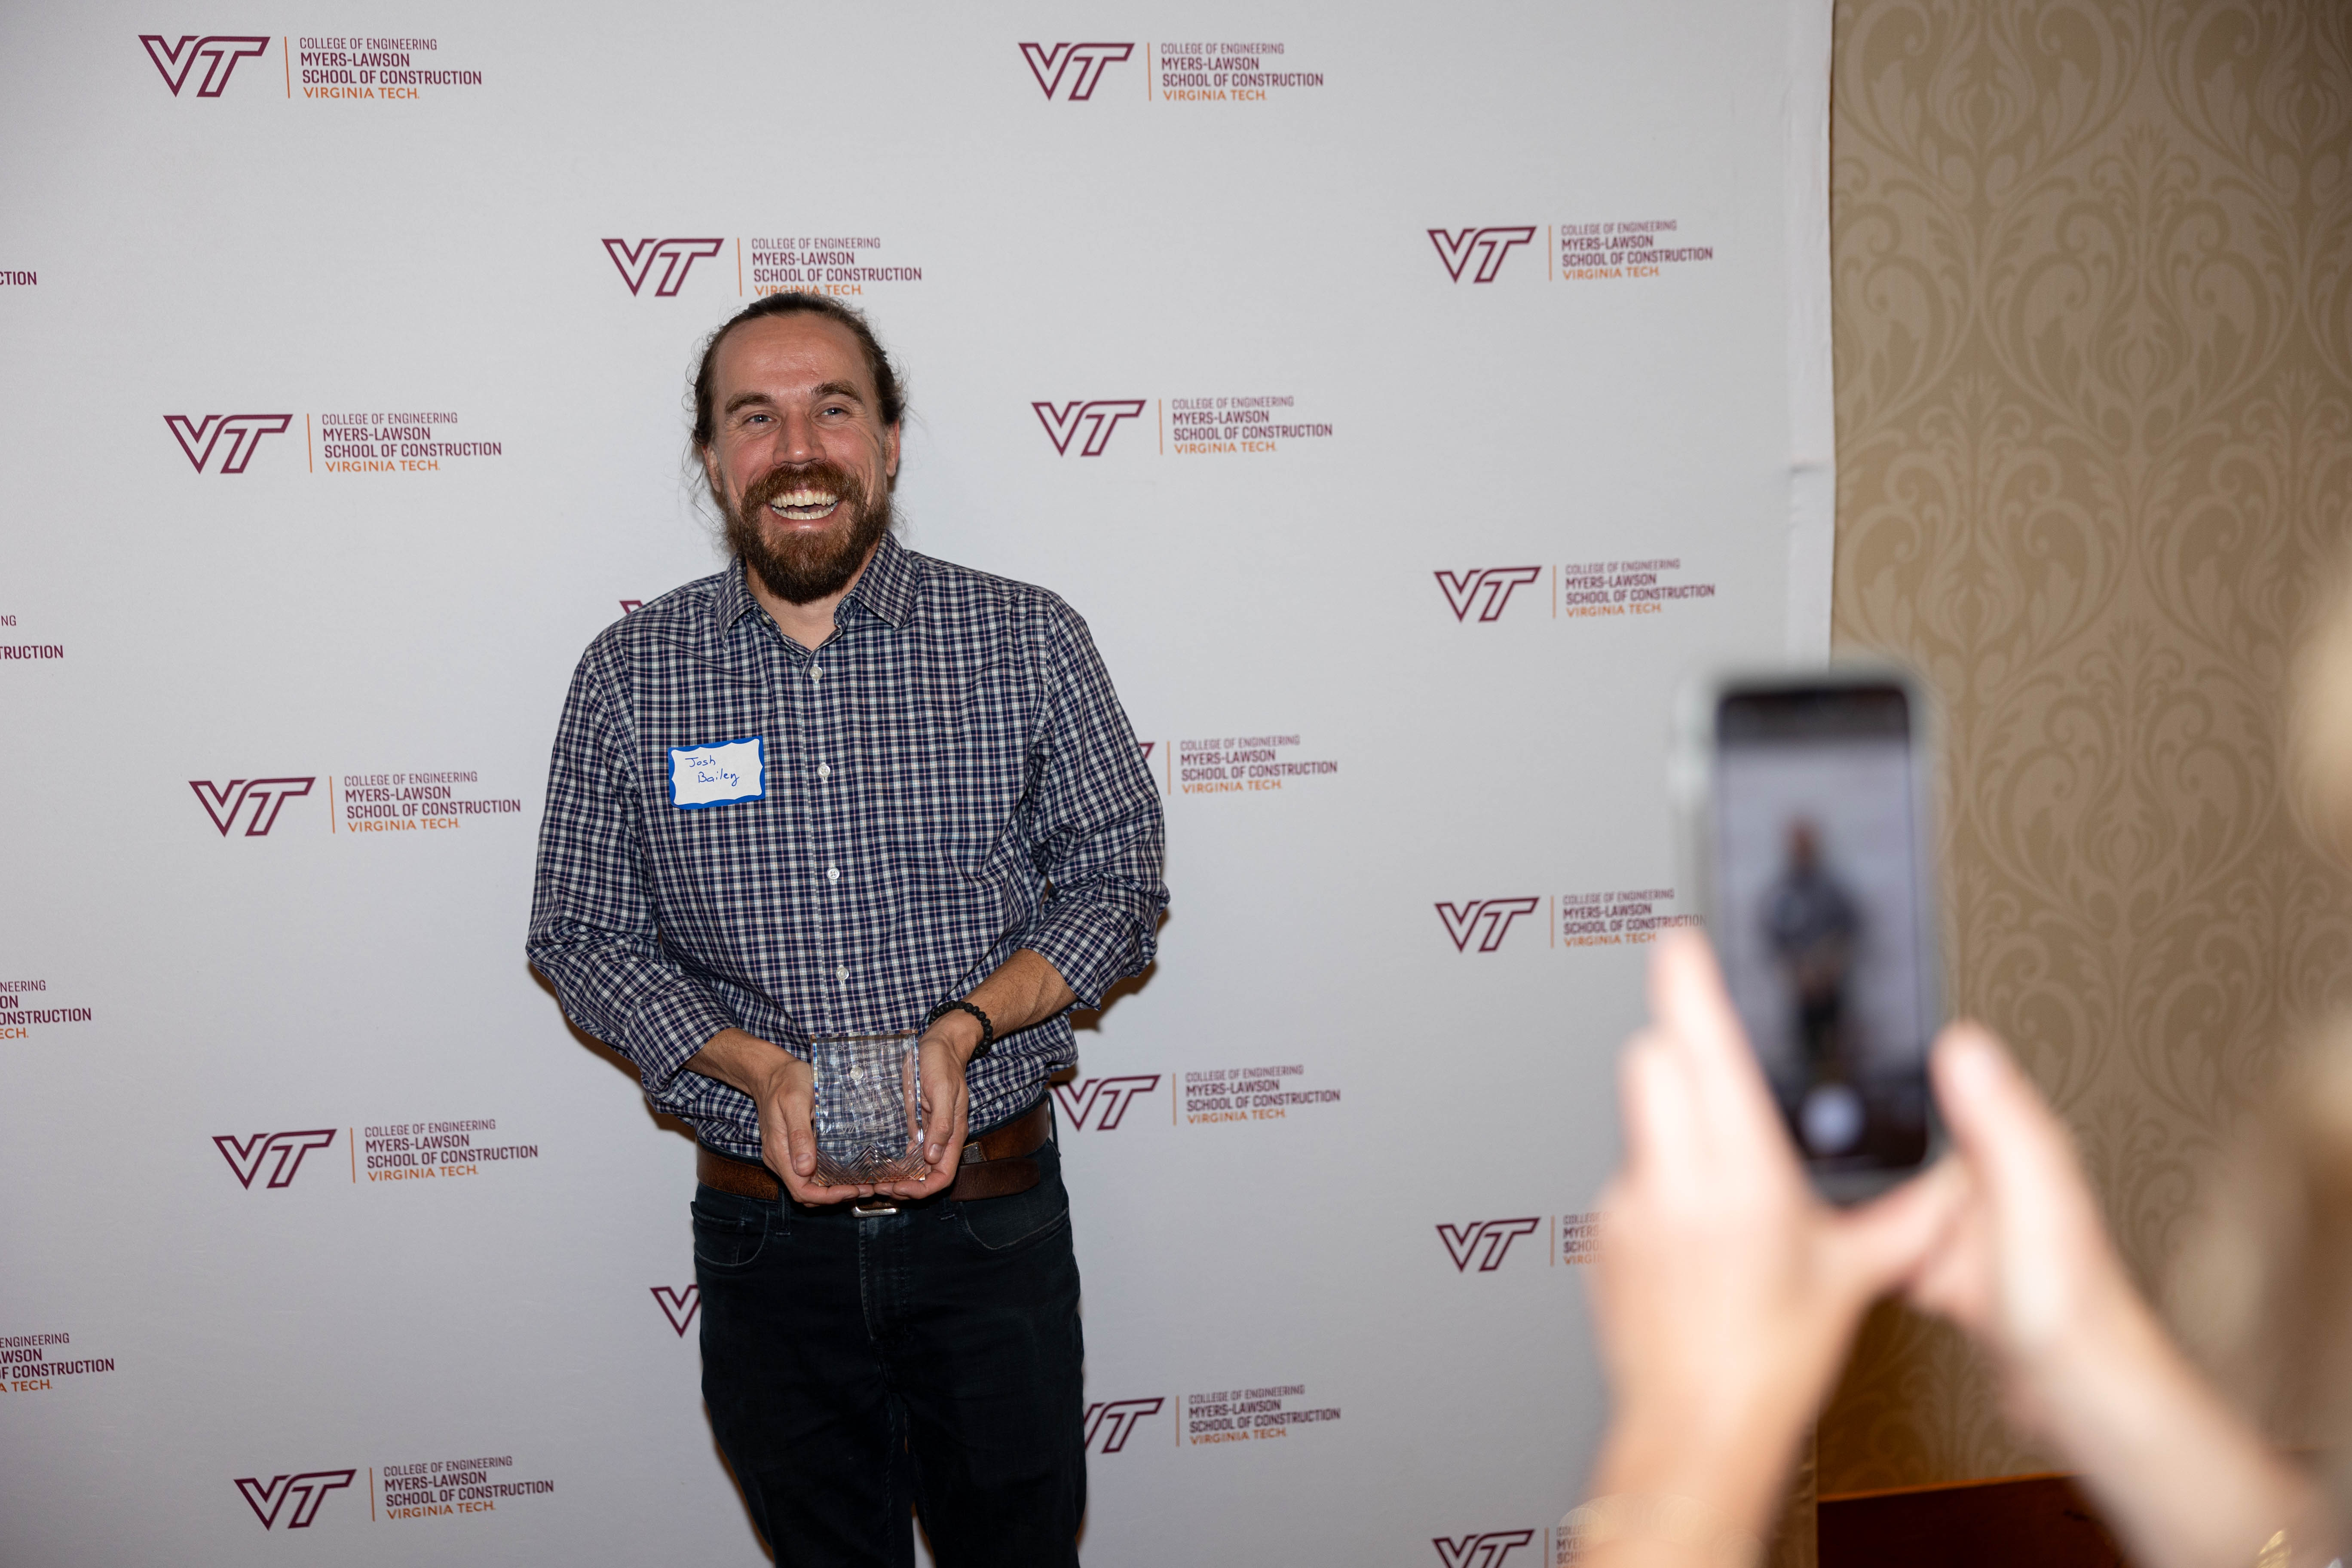 Joshua Bailey '09 with the Outstanding Building Construction Alumni Award. Photo by Will Drew for Virginia Tech.